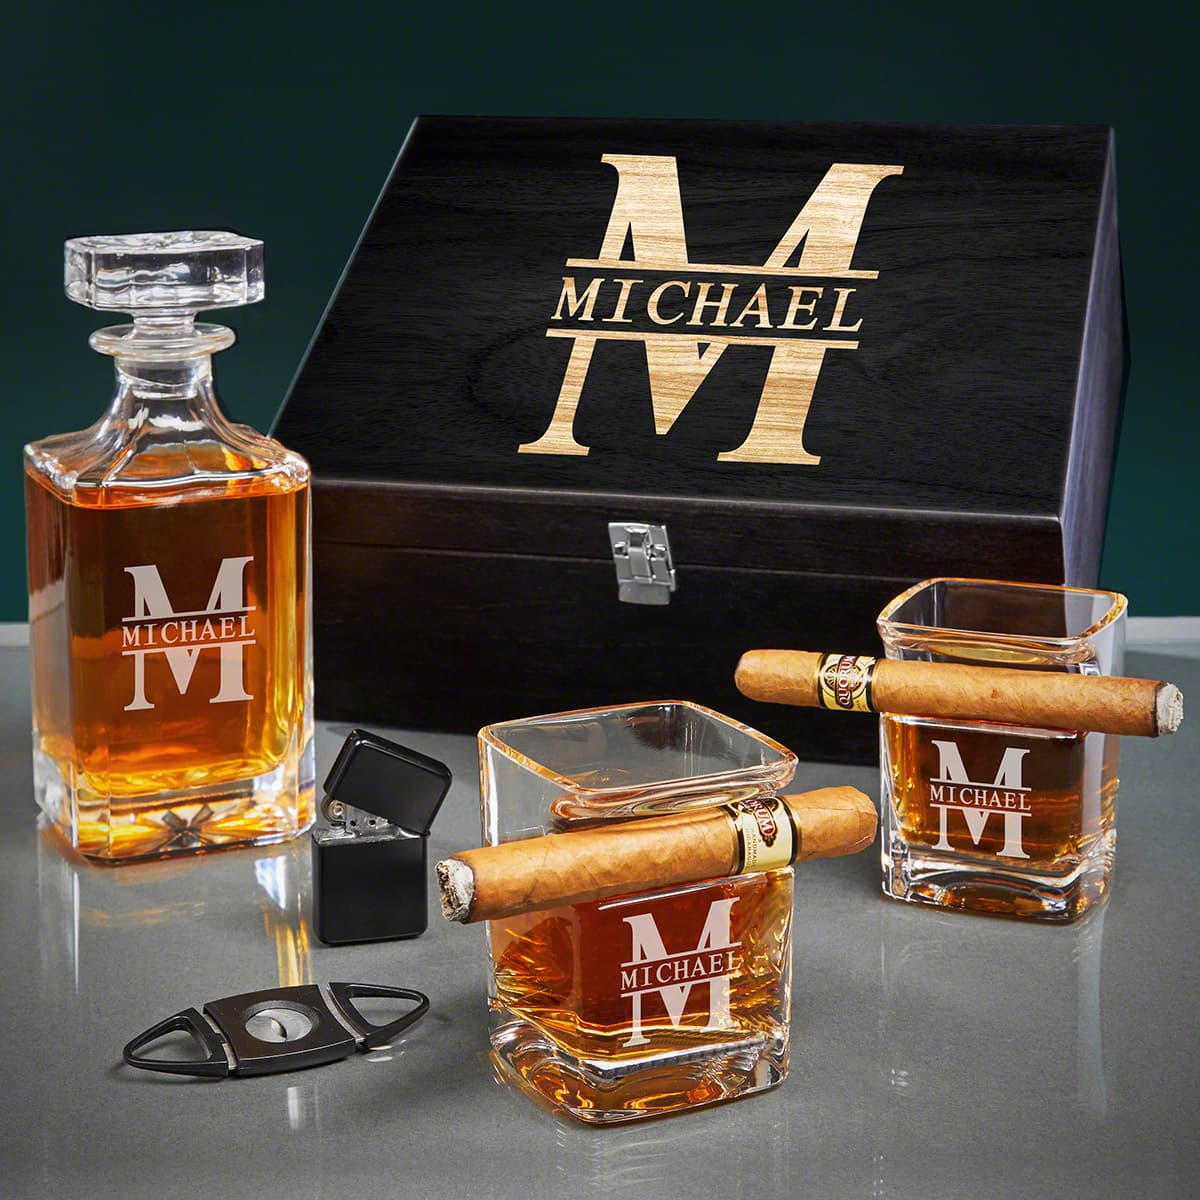 Personalized Cigar Glasses and Accessories Whiskey Decanter - Onyx Black Gift Box